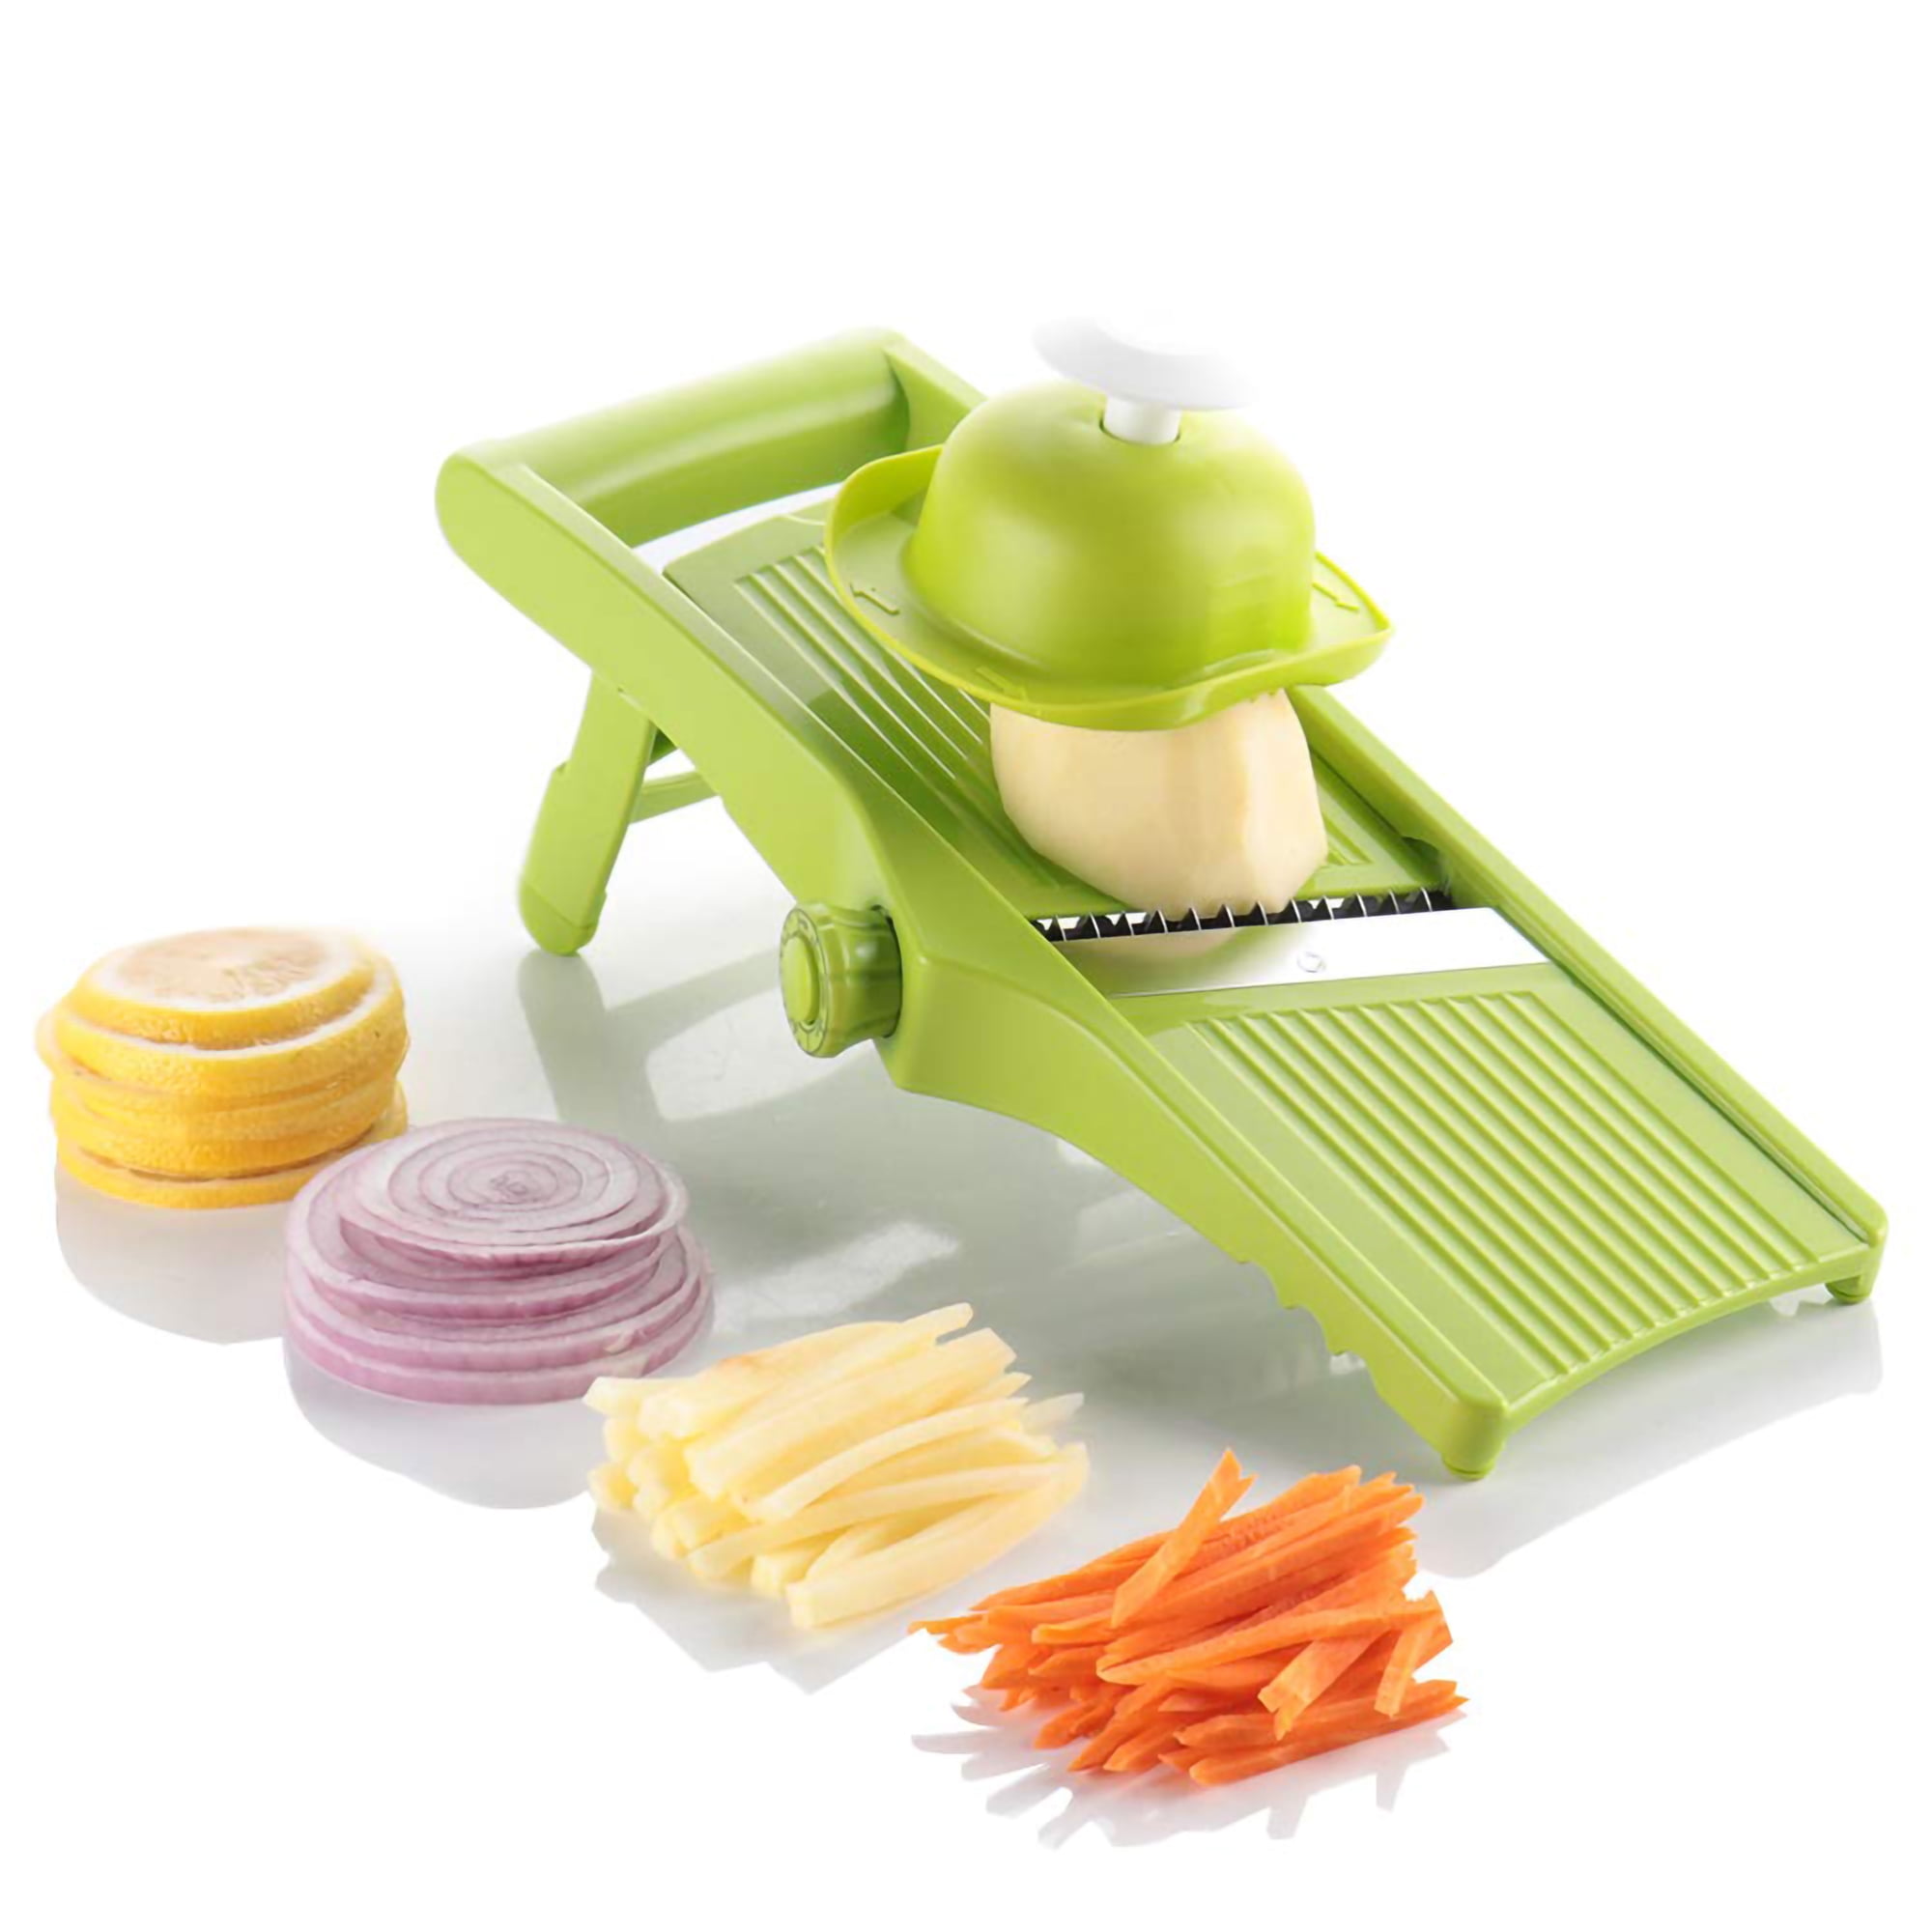 FASLMH Potato chip cutter, Fry Cutter for Onion Rings, Chips and French  Fries,Green 